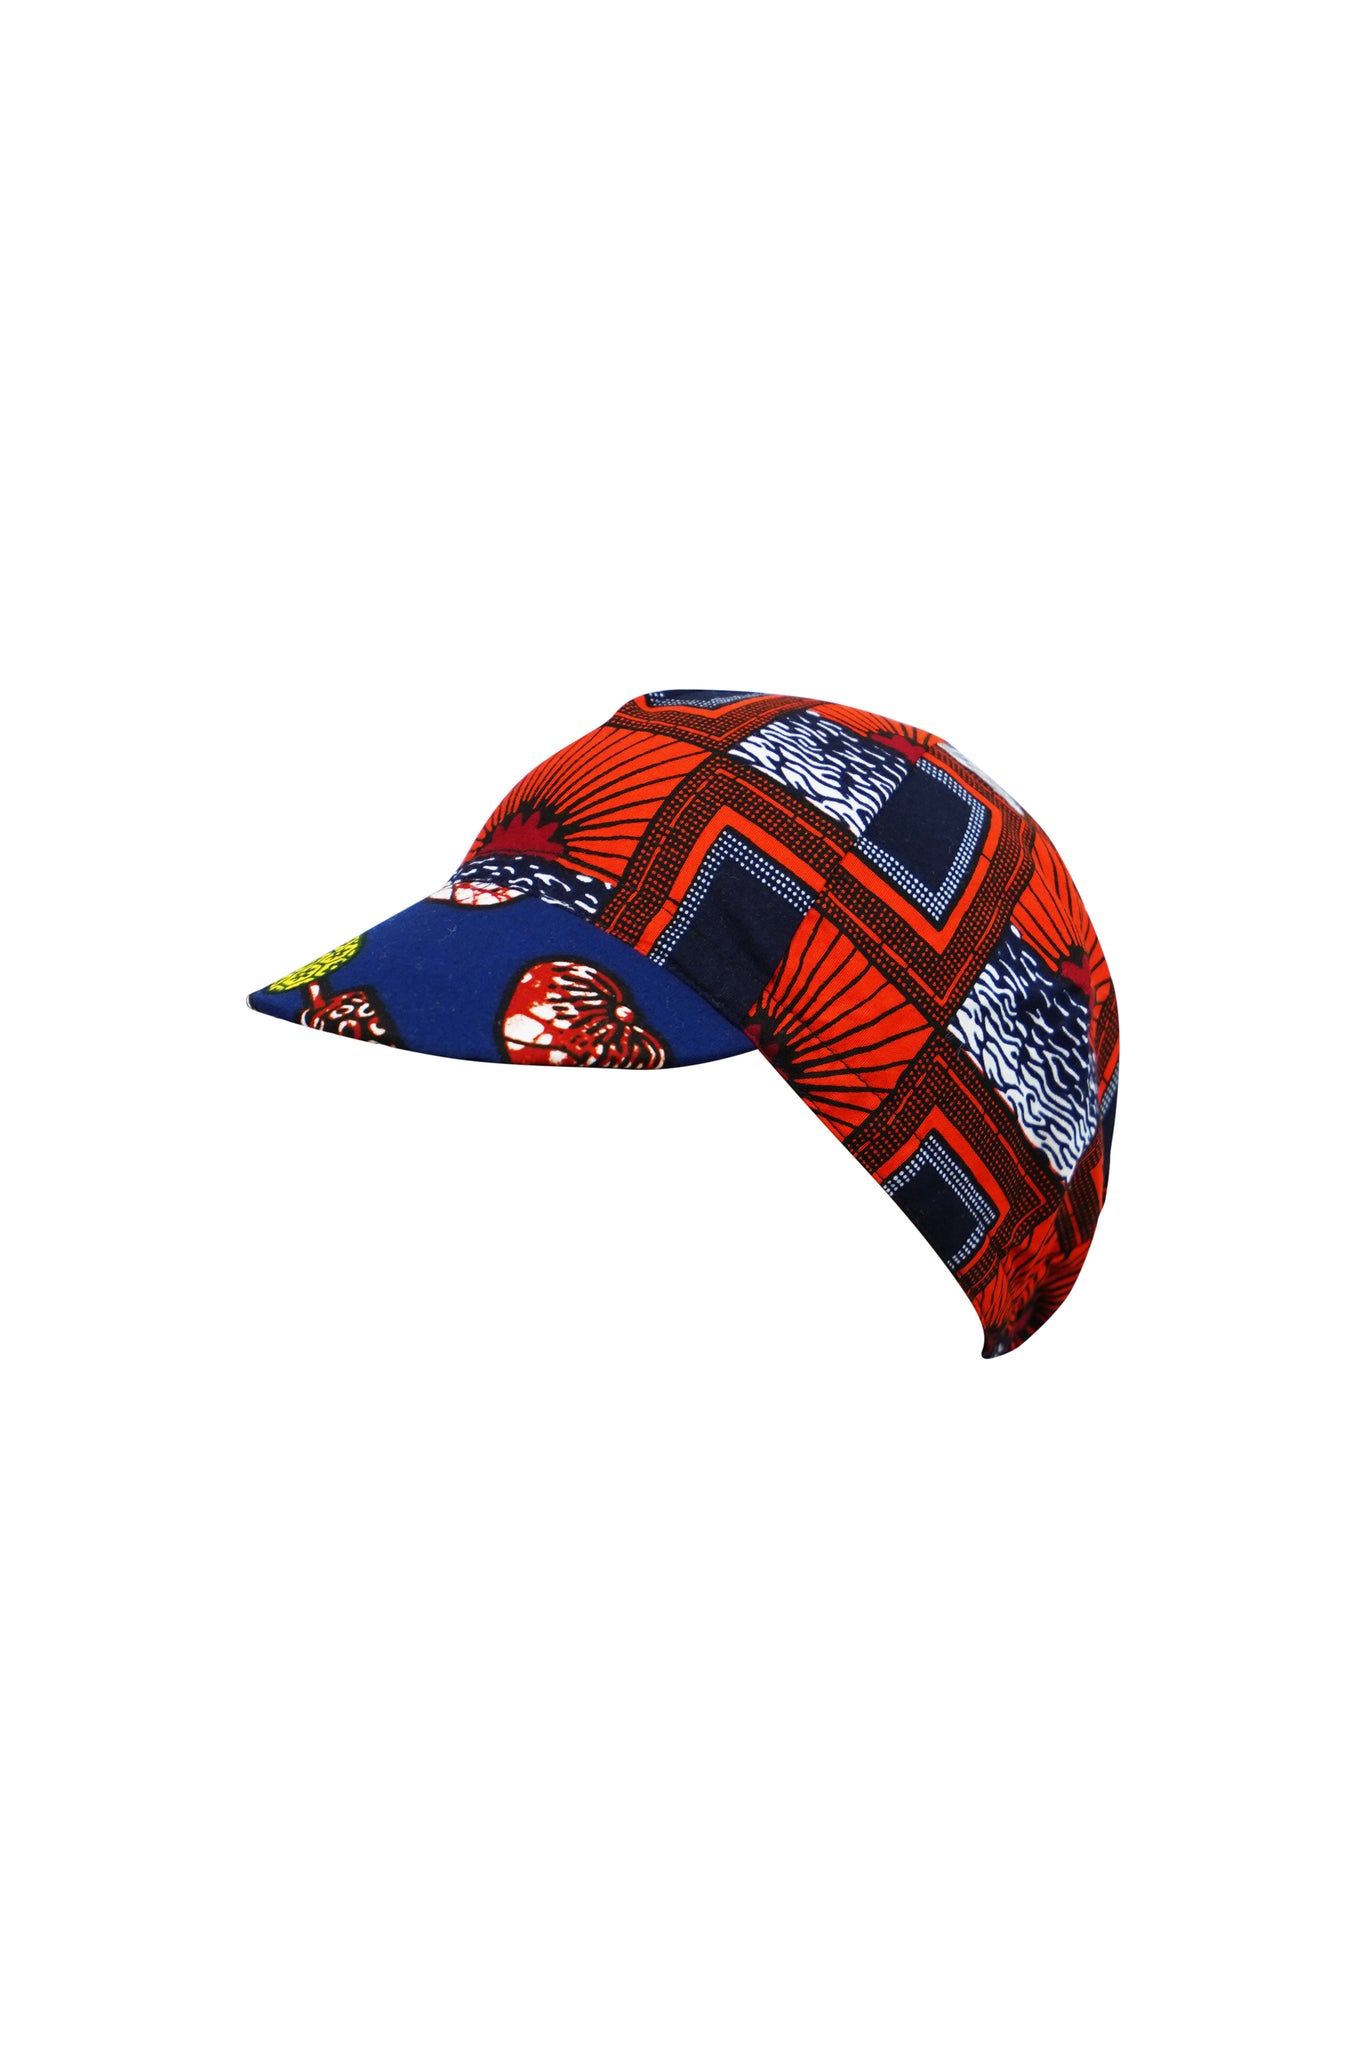 Colorful cycling cap - Red Blue and Yellow African Ankara Wax Cotton Print - 9